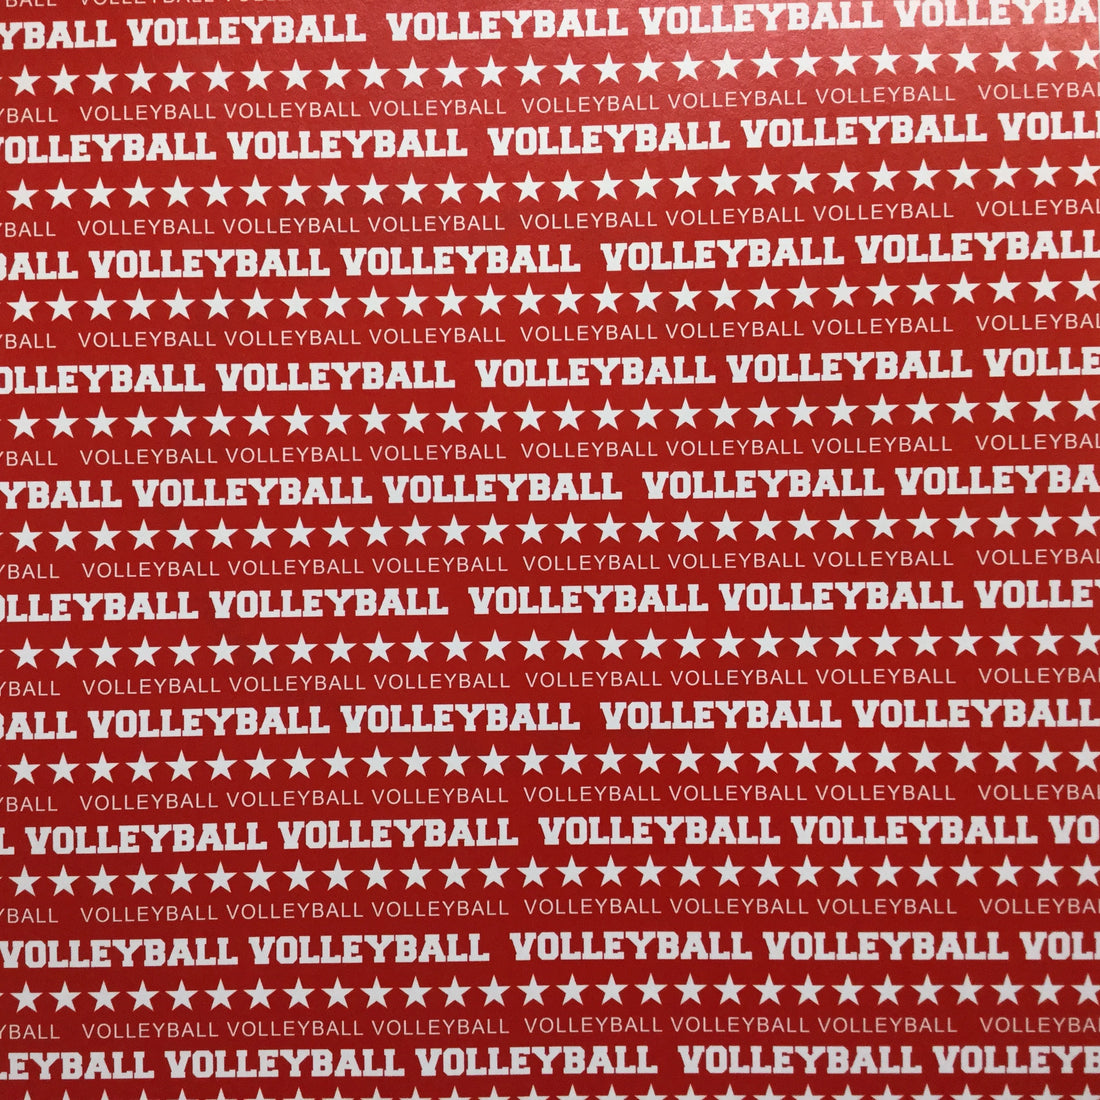 VOLLEYBALL DS CHALKBOARD SPORTS  Red 12x12 Scrapbook Paper Scrapbooksrus 